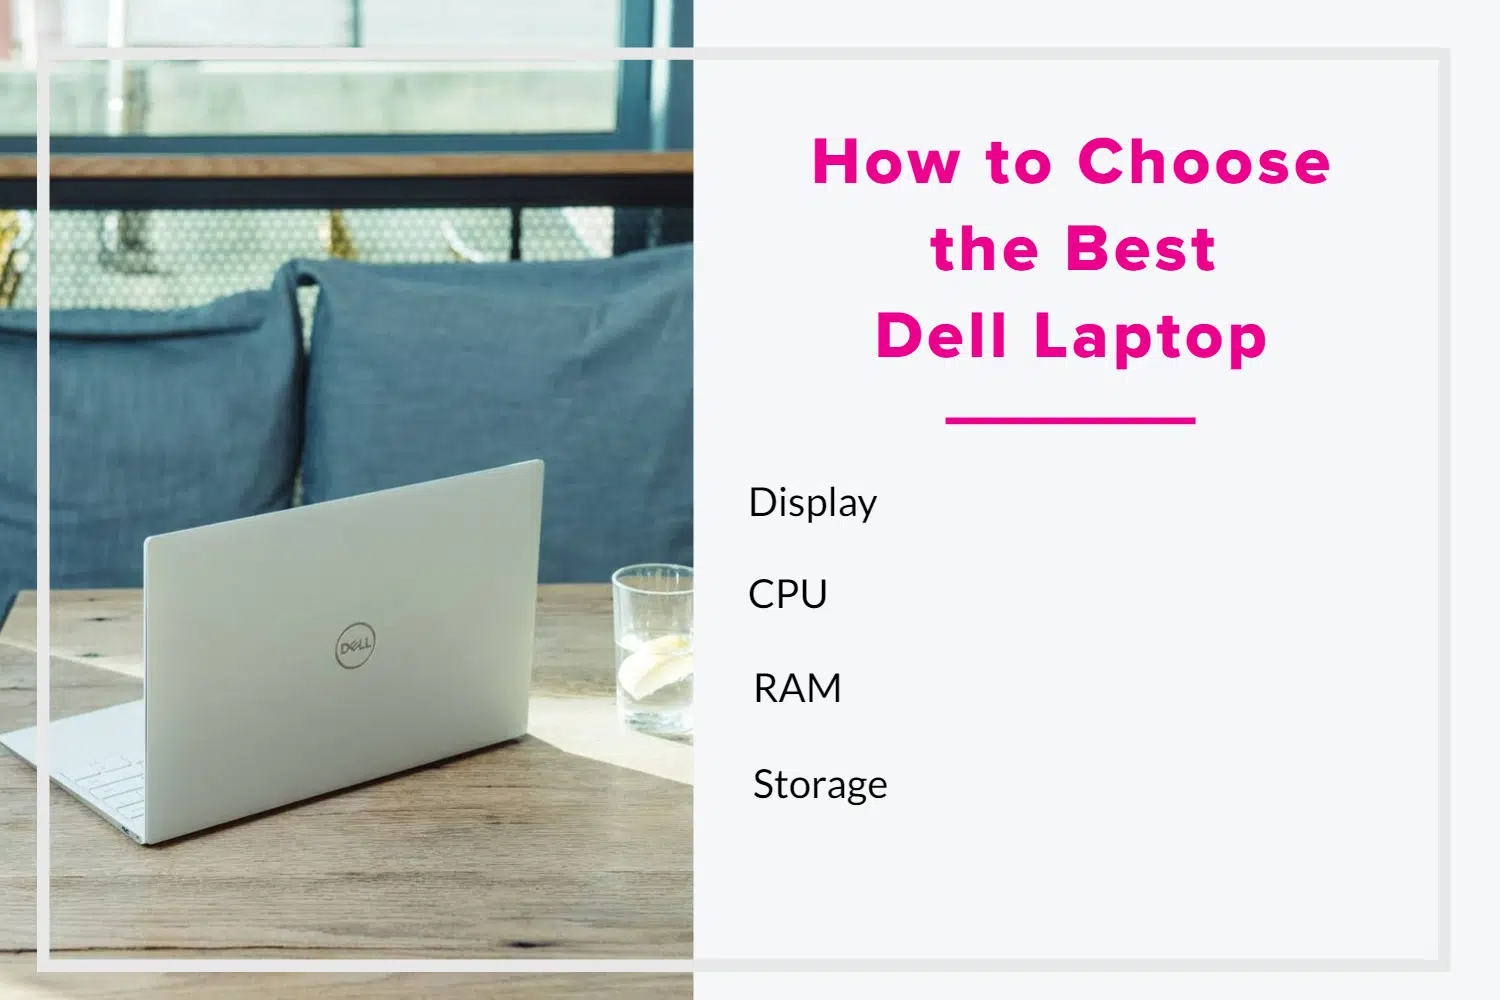 How to Choose the Best Dell Laptop